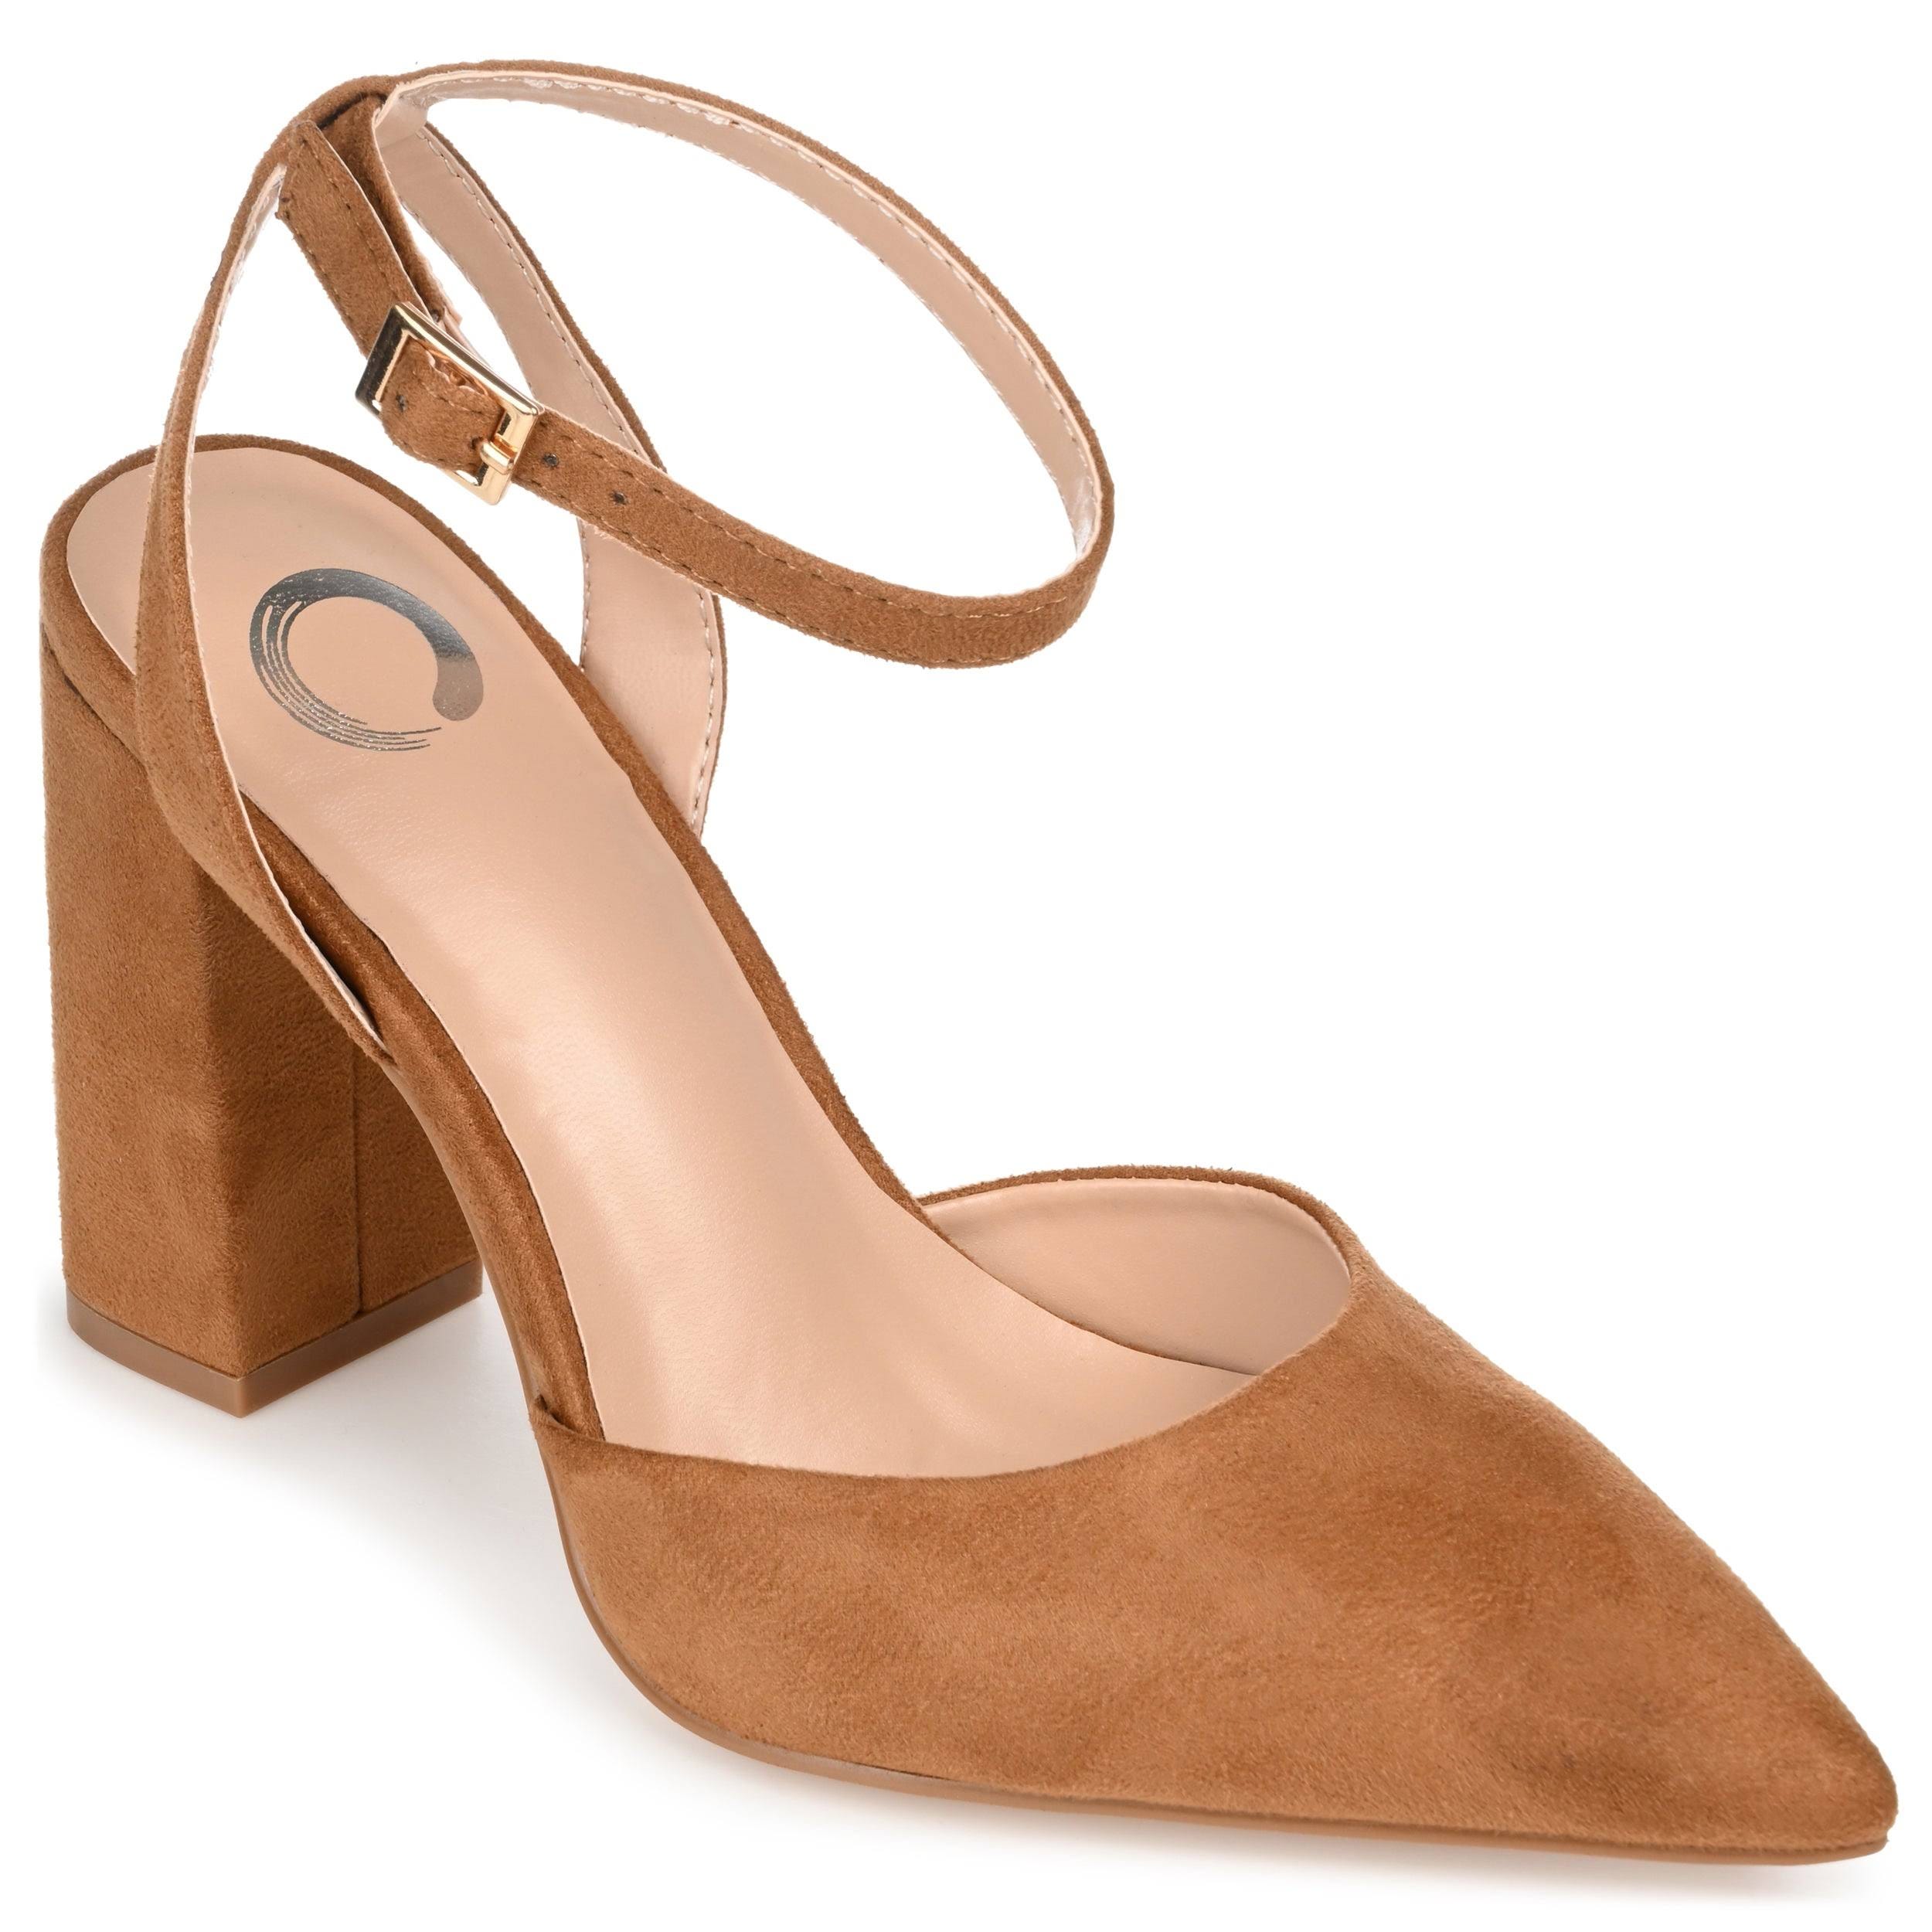 Vegan Leather Tan Pump with Pointed-Toe Design | Image